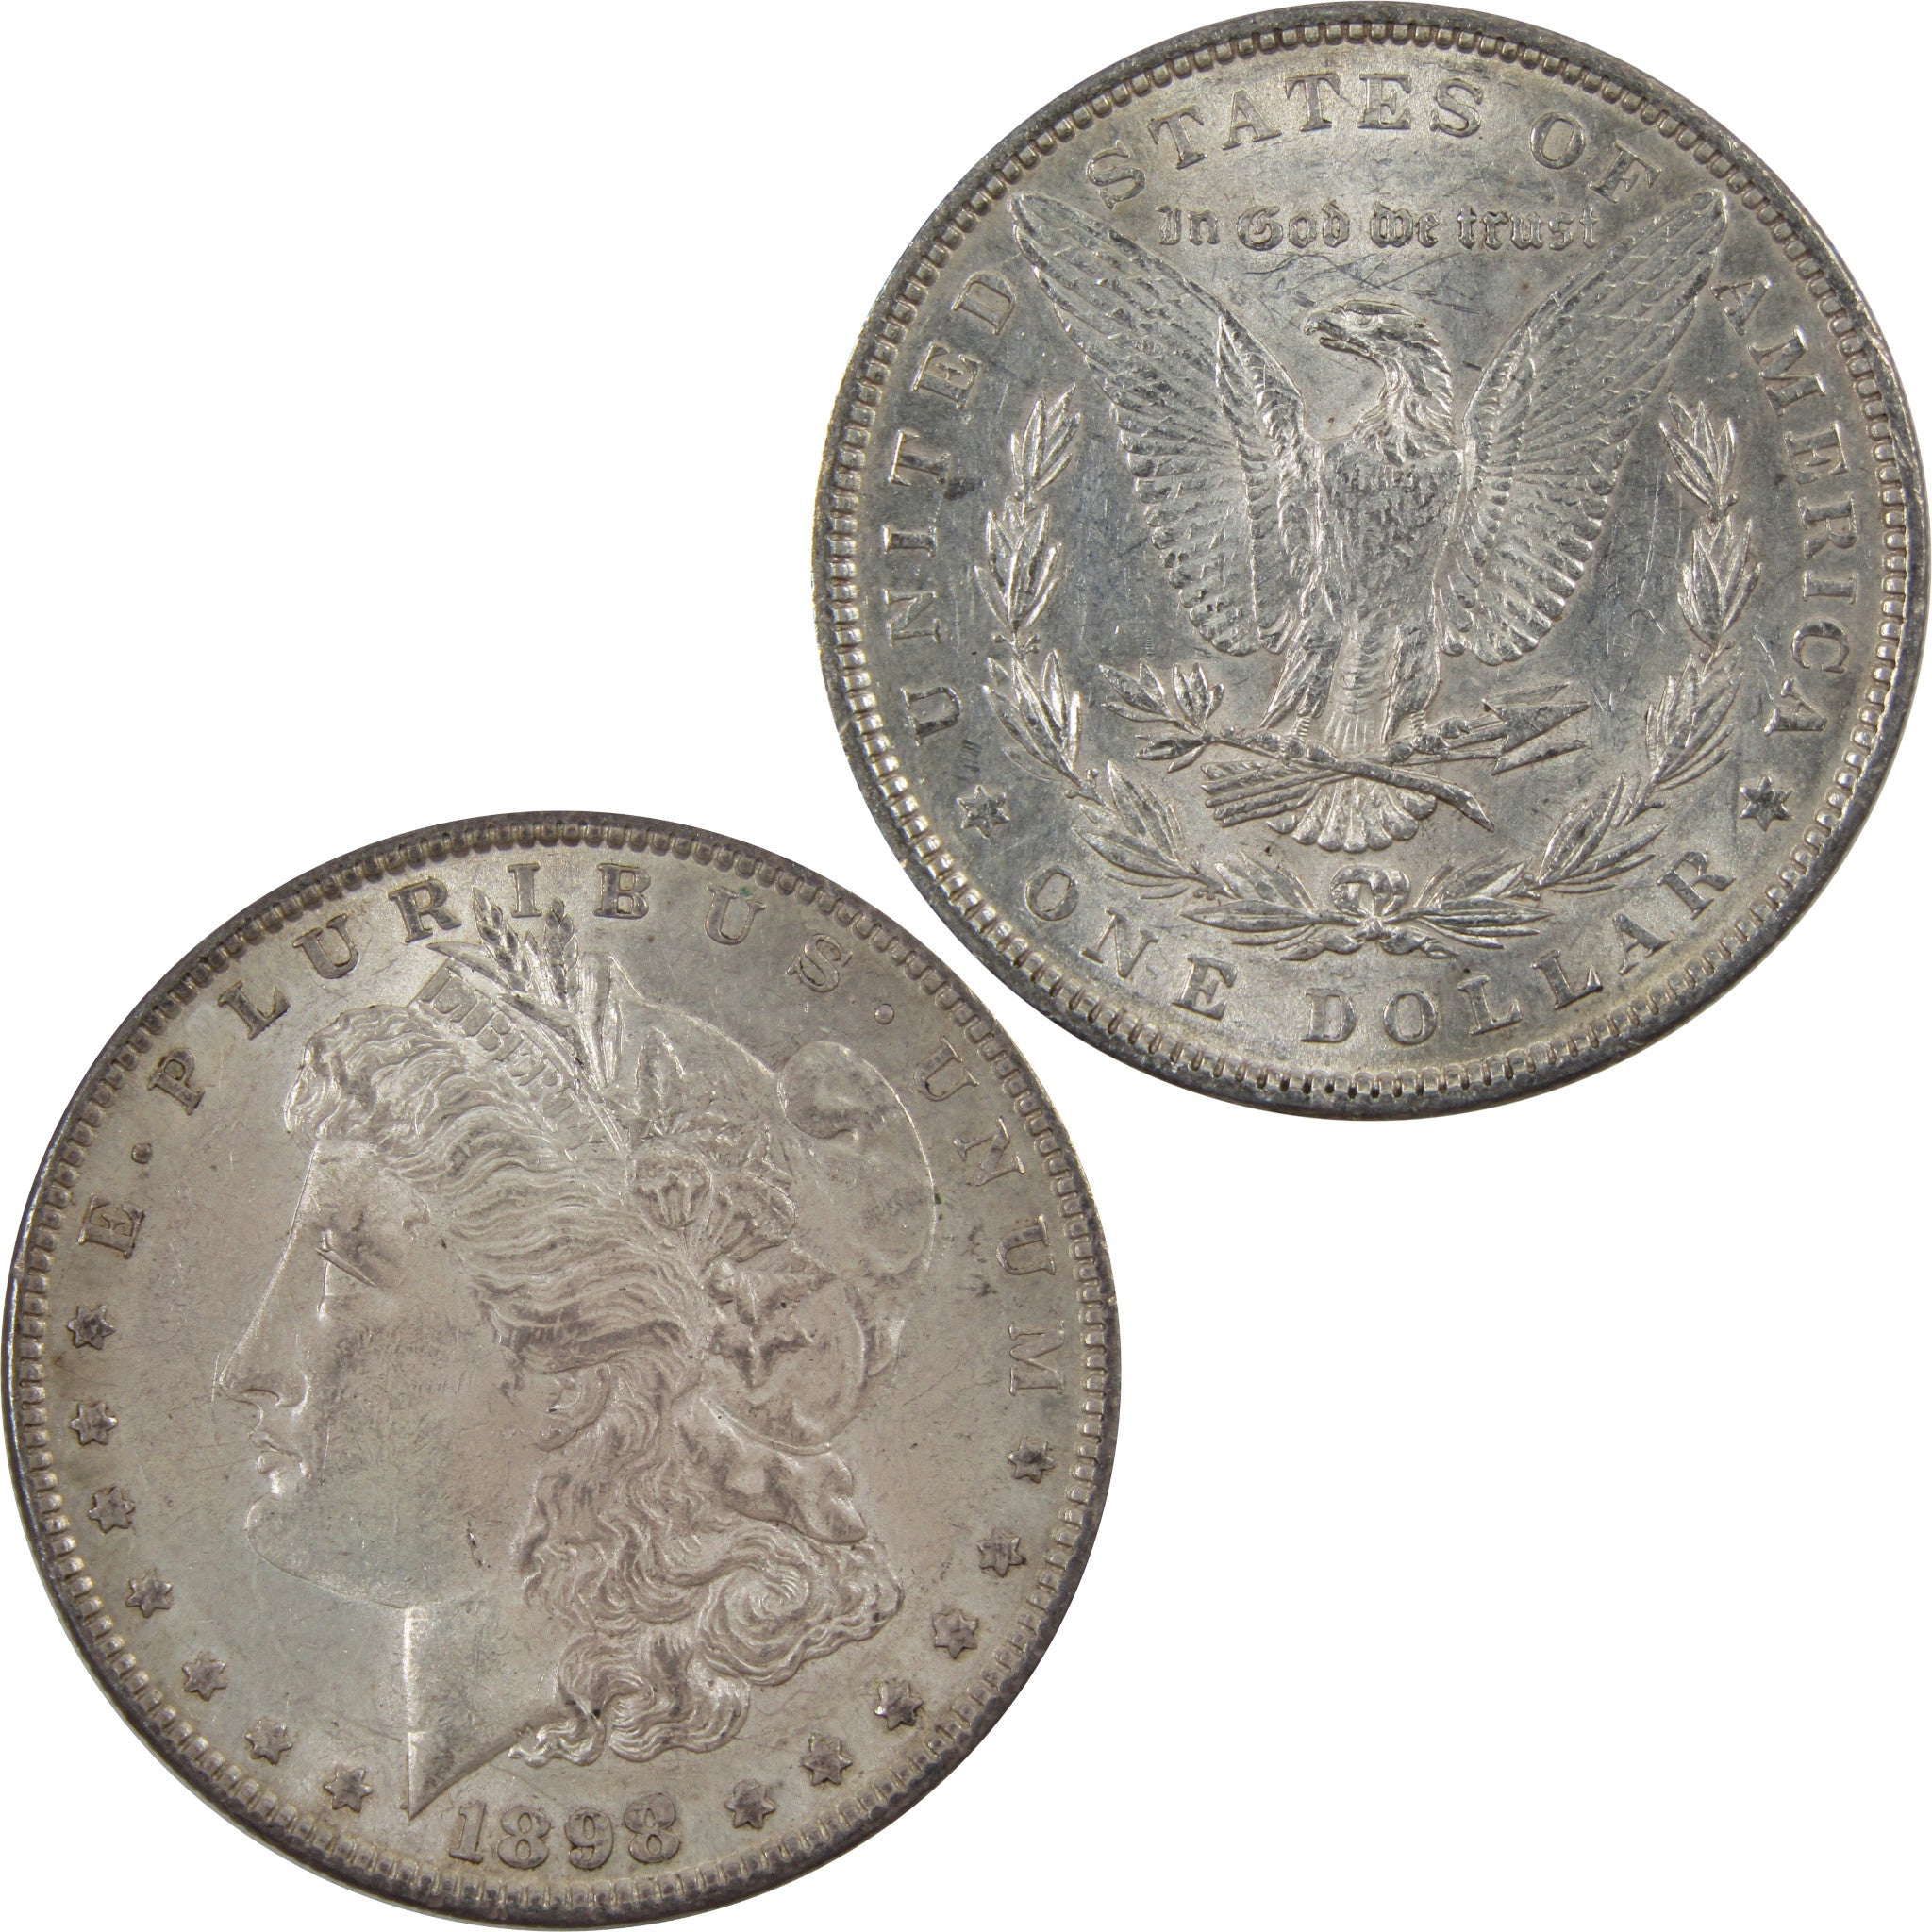 1898 Morgan Dollar AU About Uncirculated 90% Silver $1 Coin SKU:I5461 - Morgan coin - Morgan silver dollar - Morgan silver dollar for sale - Profile Coins &amp; Collectibles